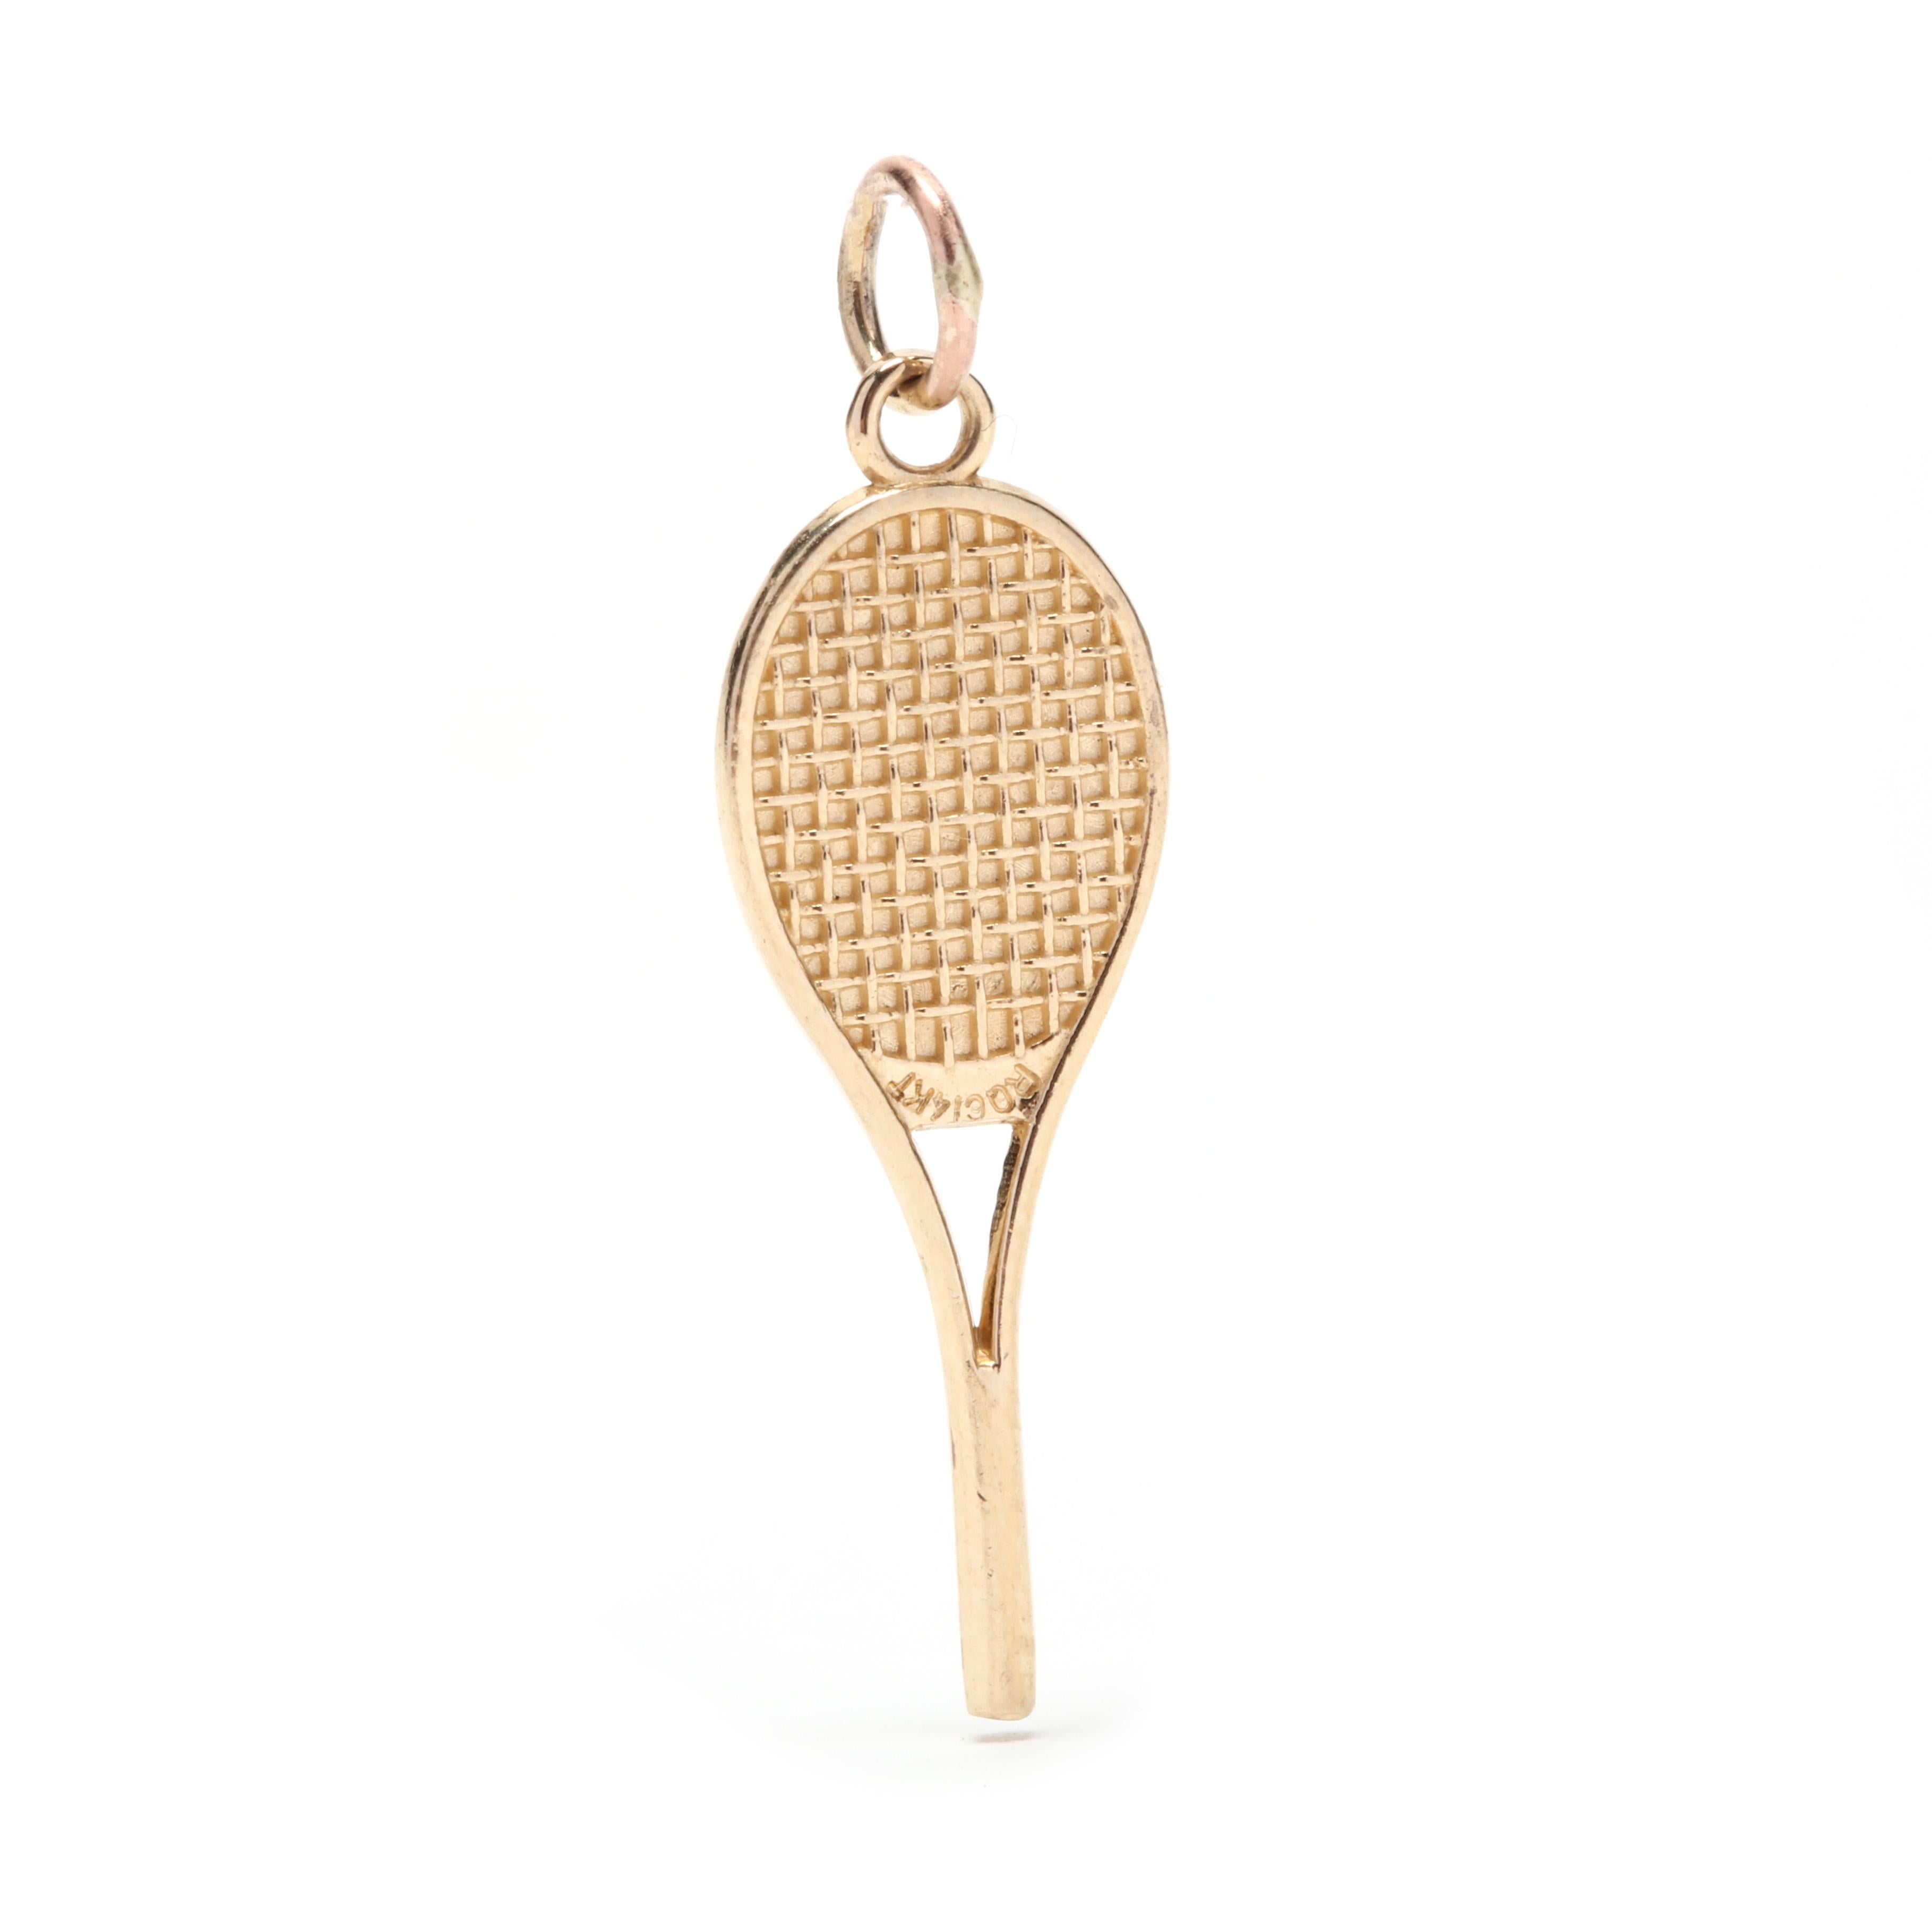 A 14 karat yellow gold and pearl tennis racket charm / pendant. This charm features a tennis racket motif with etched detailing and a white pearl bead in the center.

Stones:
- pearl, 1 stone
- round bead
- 2.15 mm

Length: 1 1/8 in.

Width: 3/8